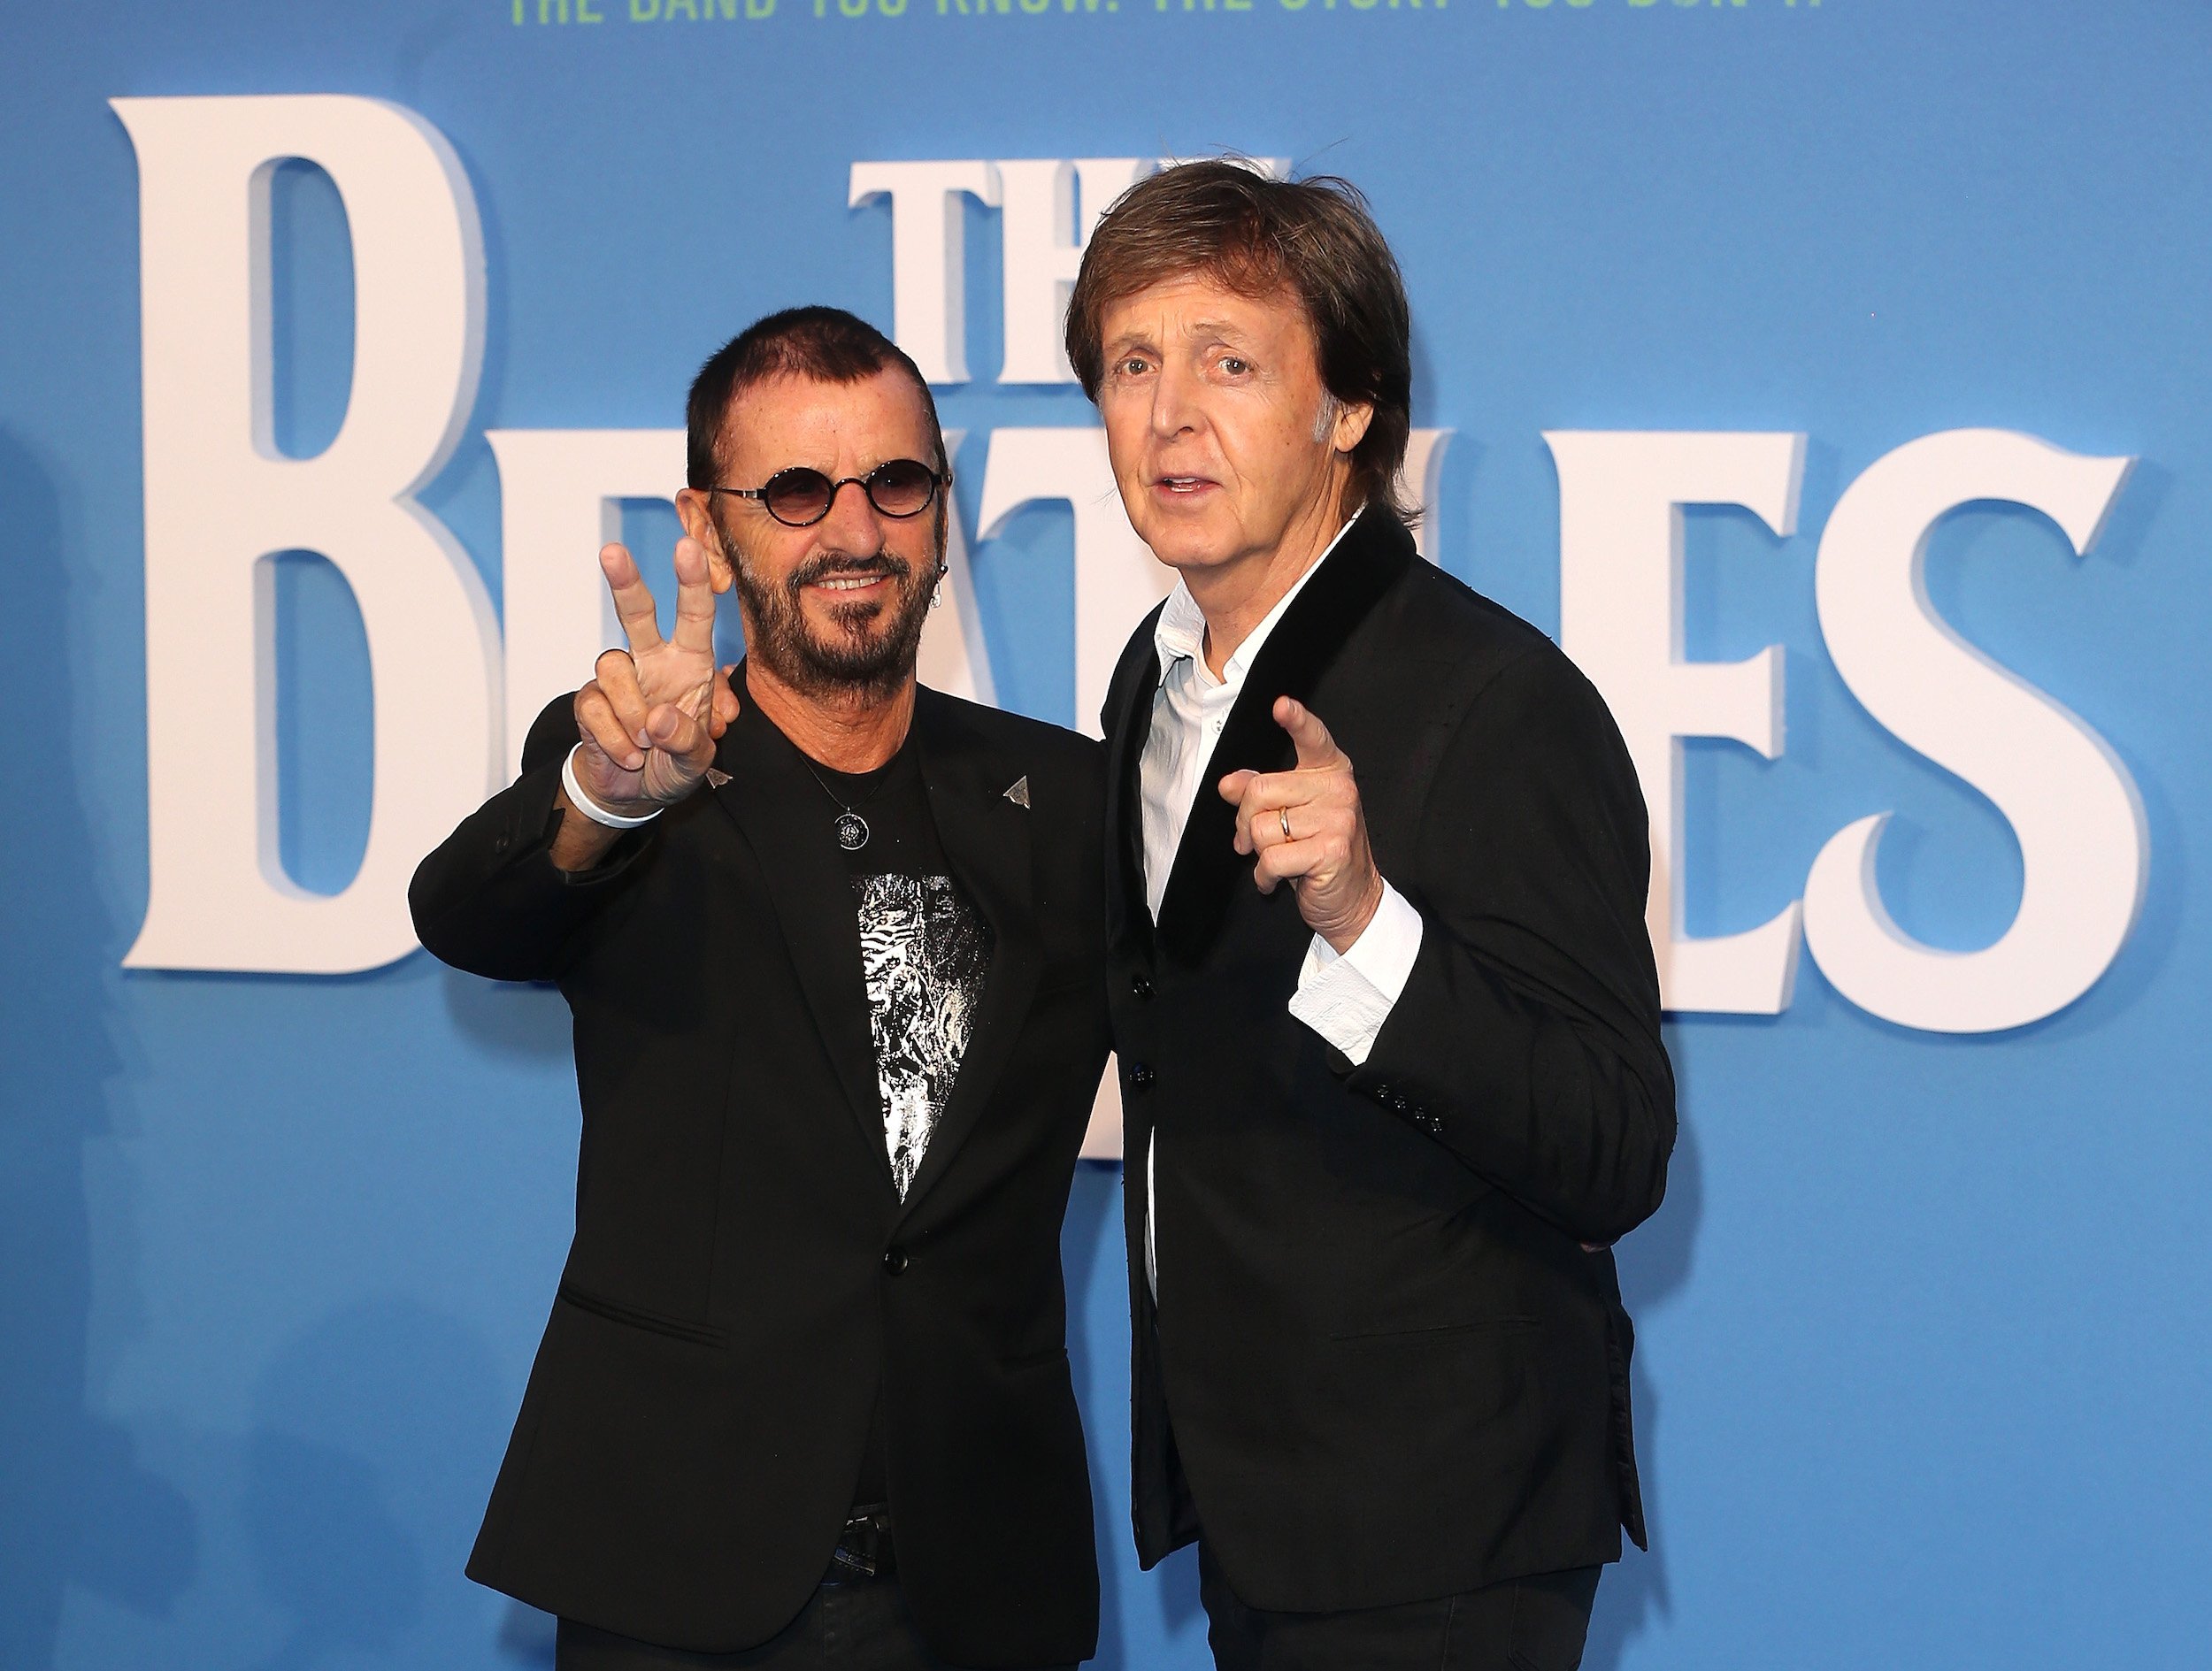 The Paul McCartney Song That Featured Ringo Starr Pretending to Be a